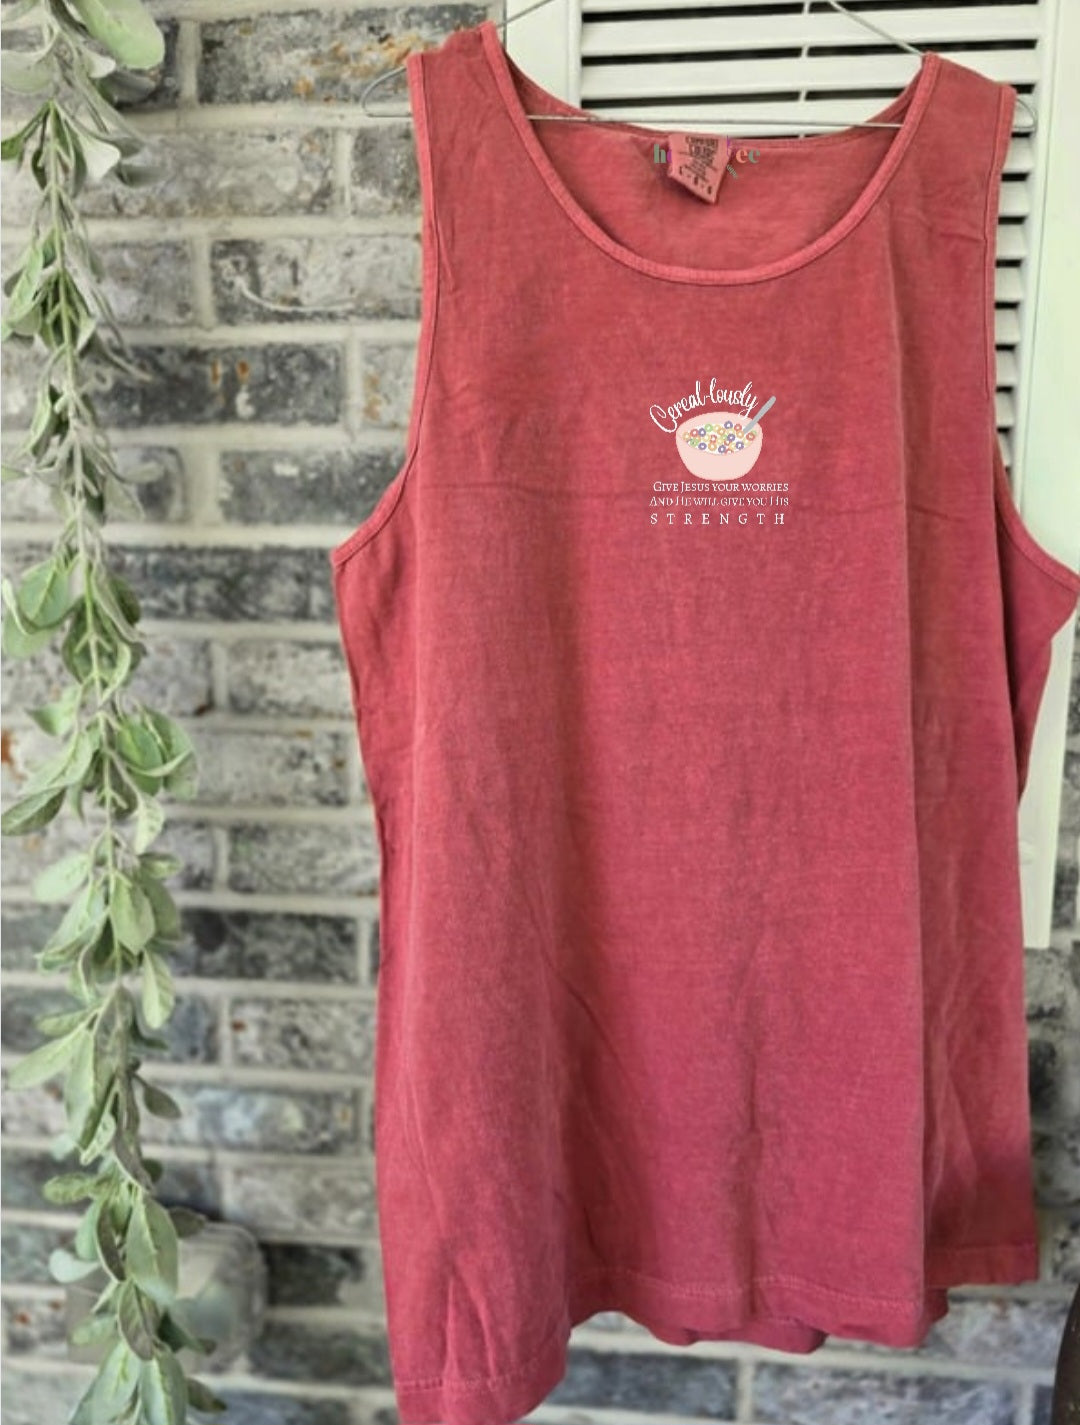 Cereal-lously Give Jesus Your Worries and He Will Give You His Strength. Dahlia Red Tank Top.